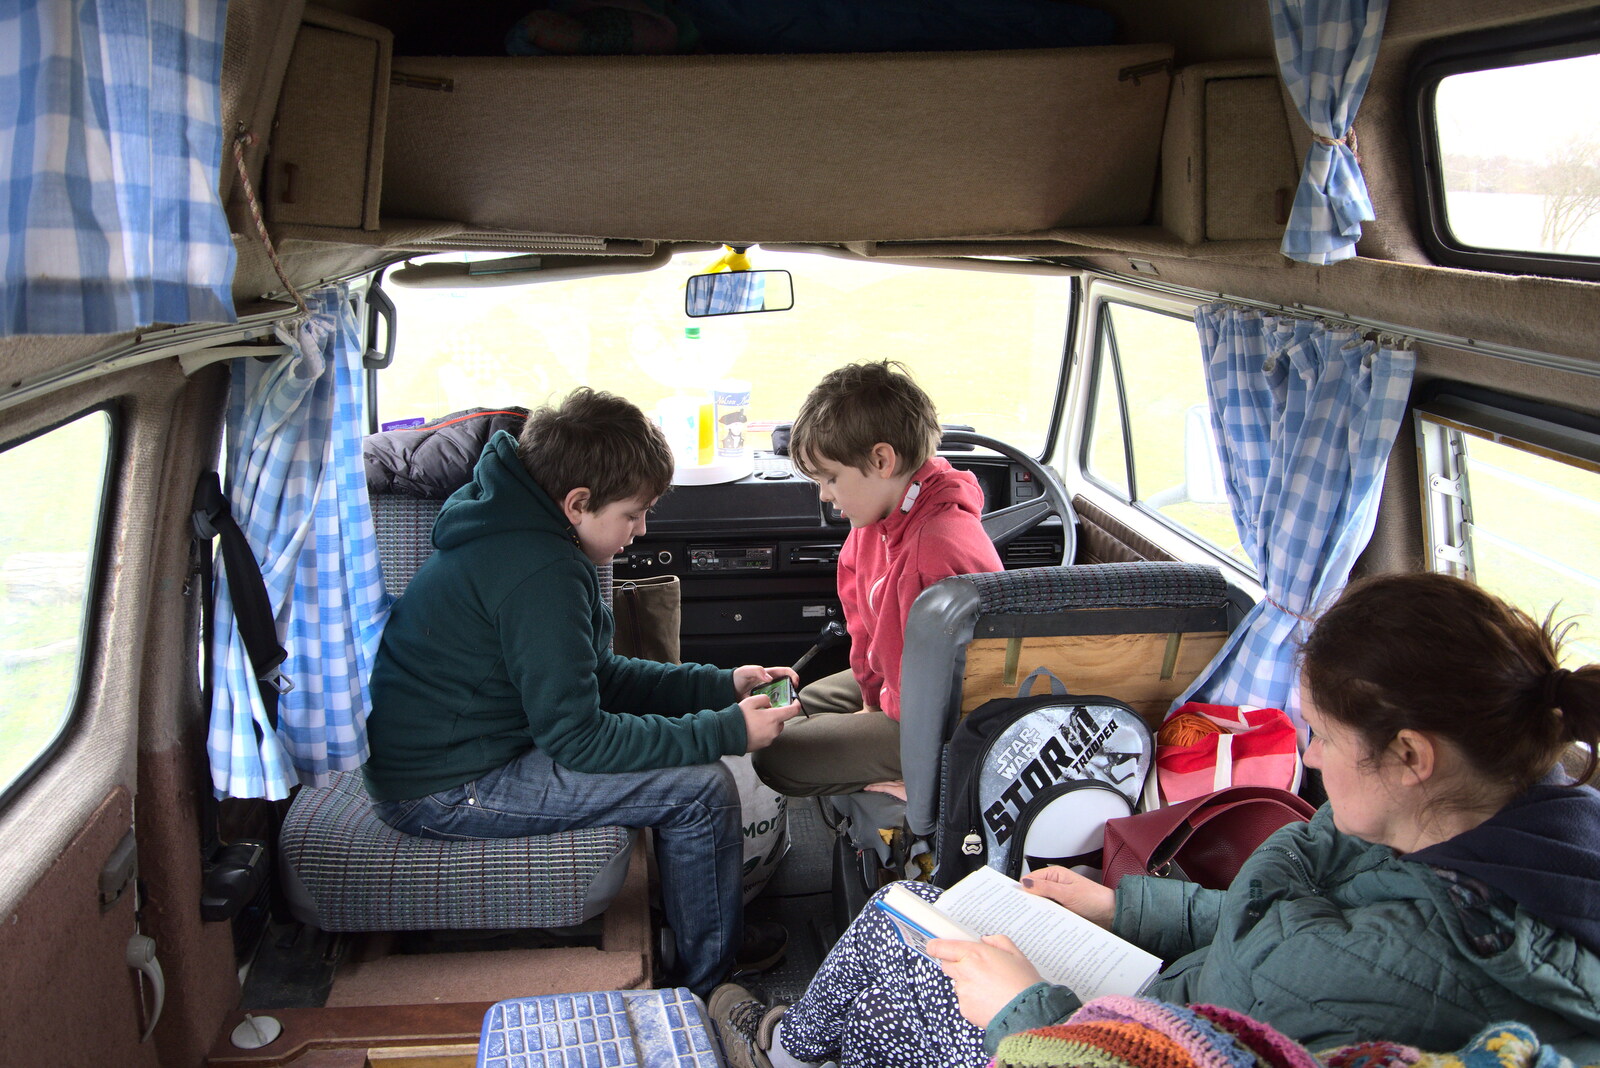 We hang out in the van from Weybread Pits and a Sunday Walk, Brome, Suffolk - 6th March 2022